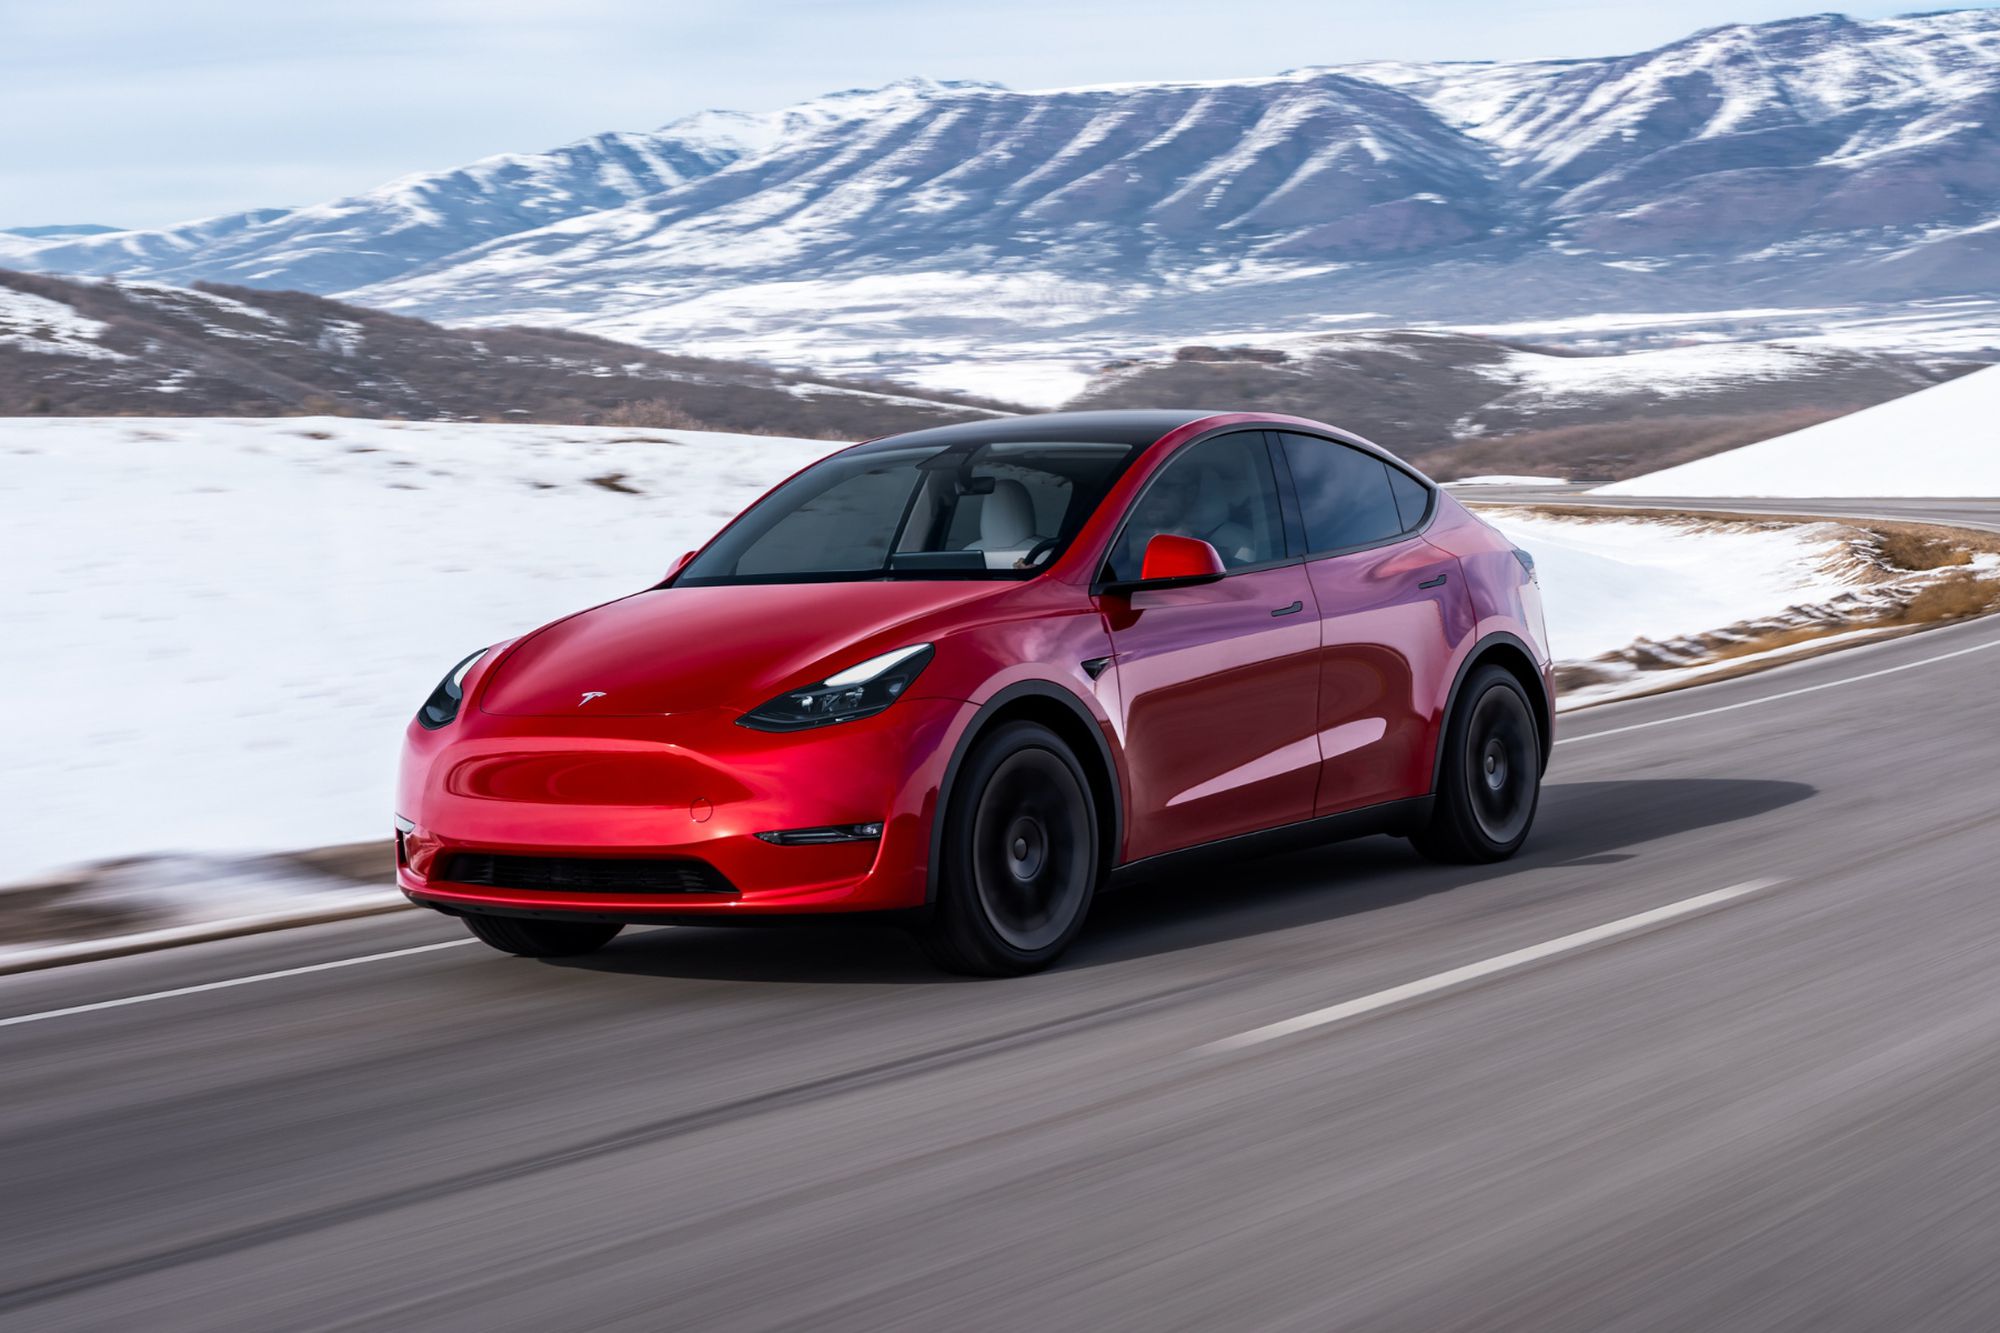 Electric Cars Take Over: How Tesla's Model Y Zoomed Past Toyota Corolla to Become the World's Favorite Ride in 2023